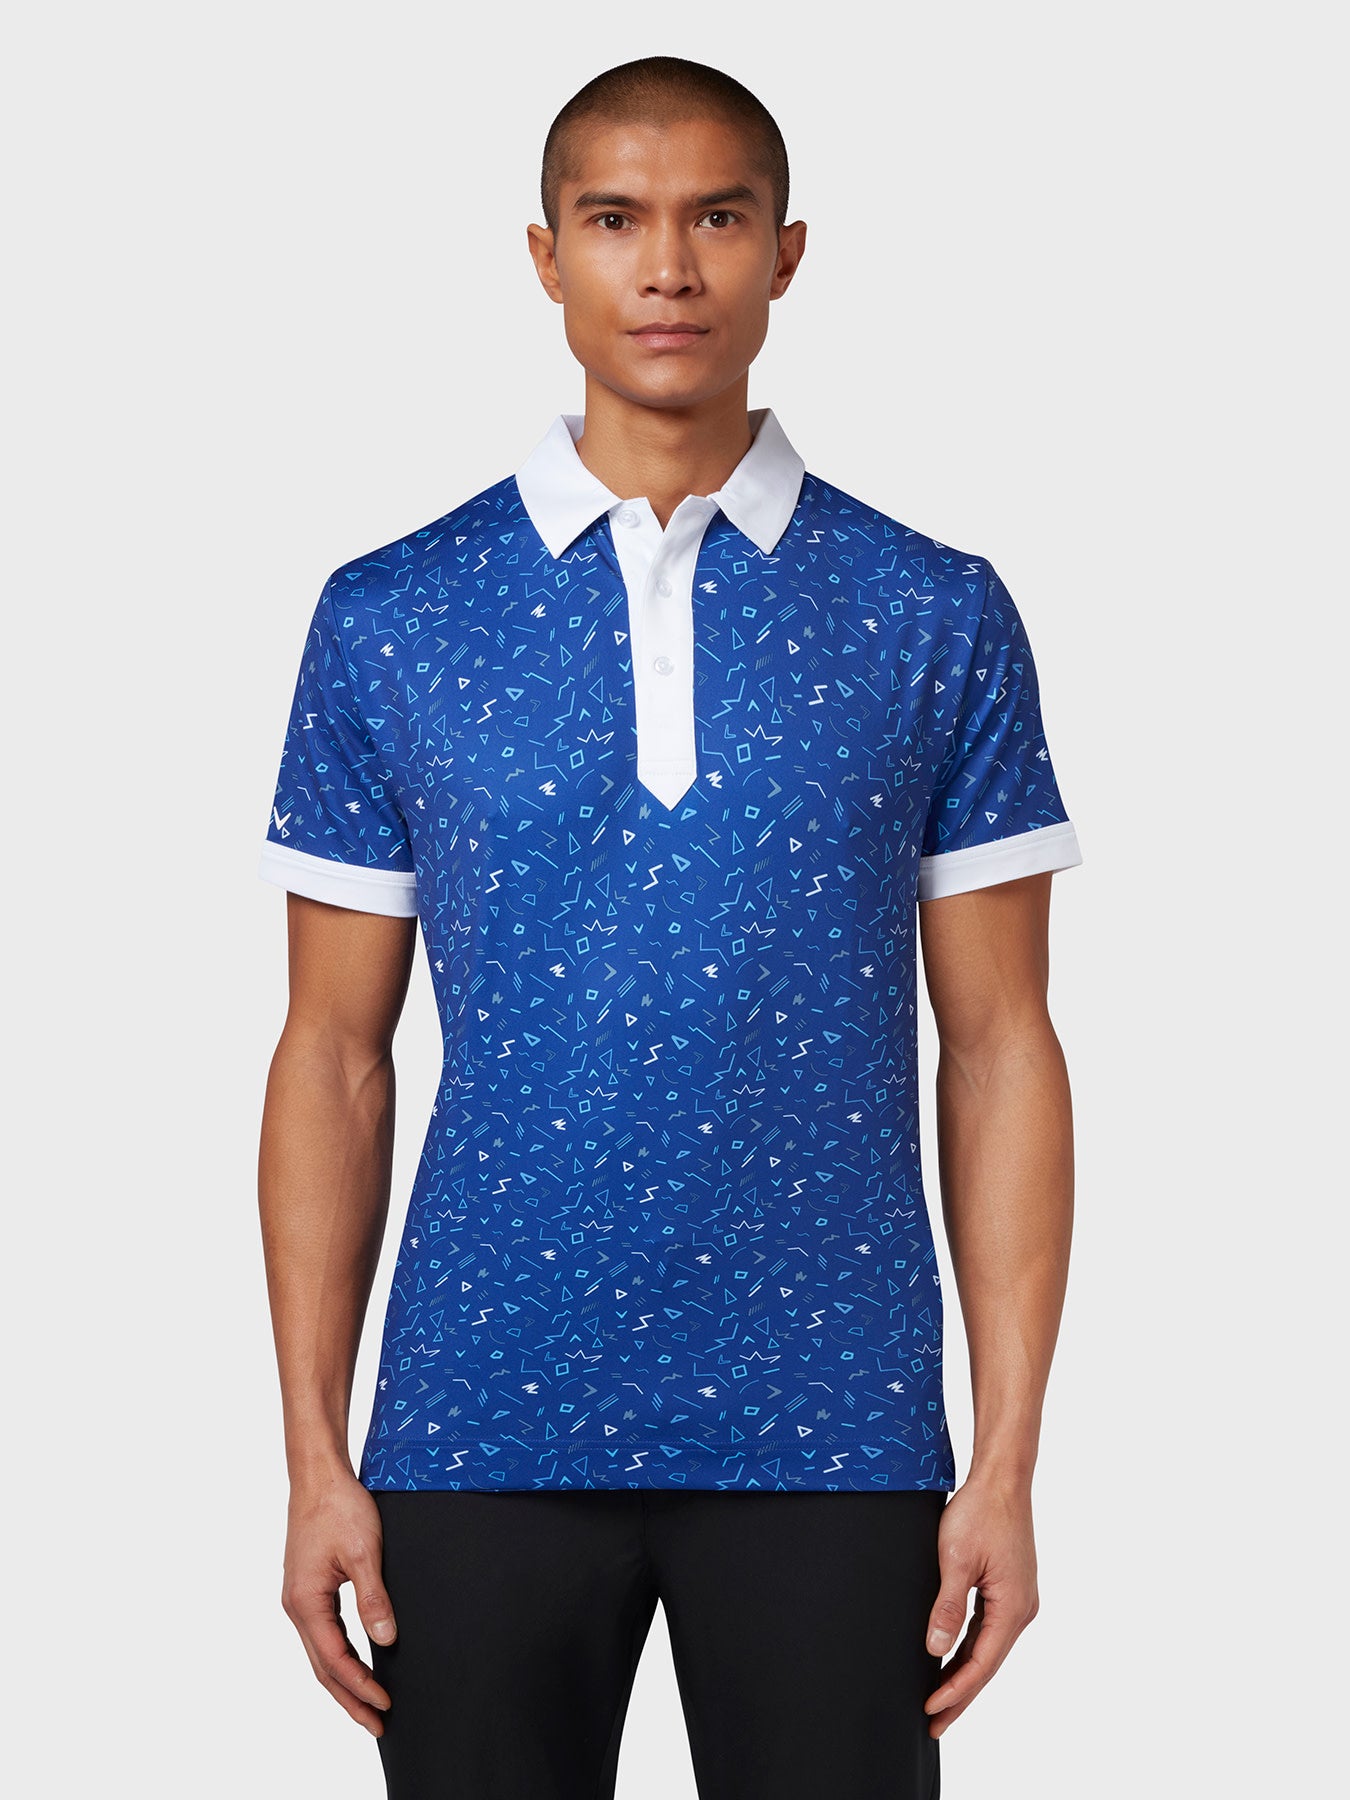 View X Series Chev Memphis All Over Print Polo In Clematis Blue Clematis Blue XS information